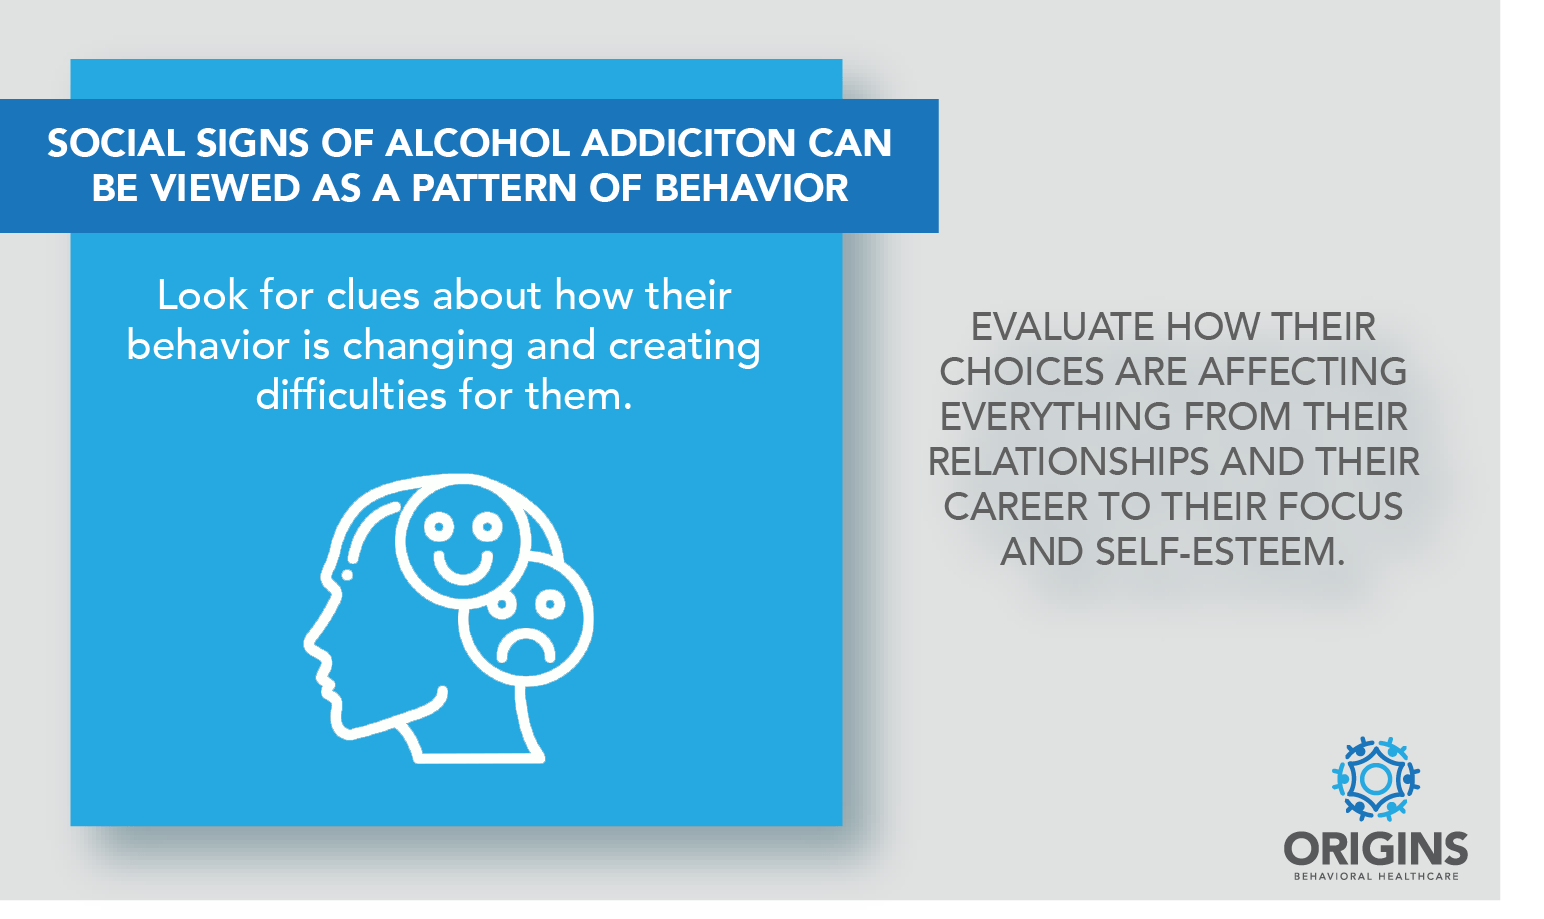 Social signs of alcohol addiction